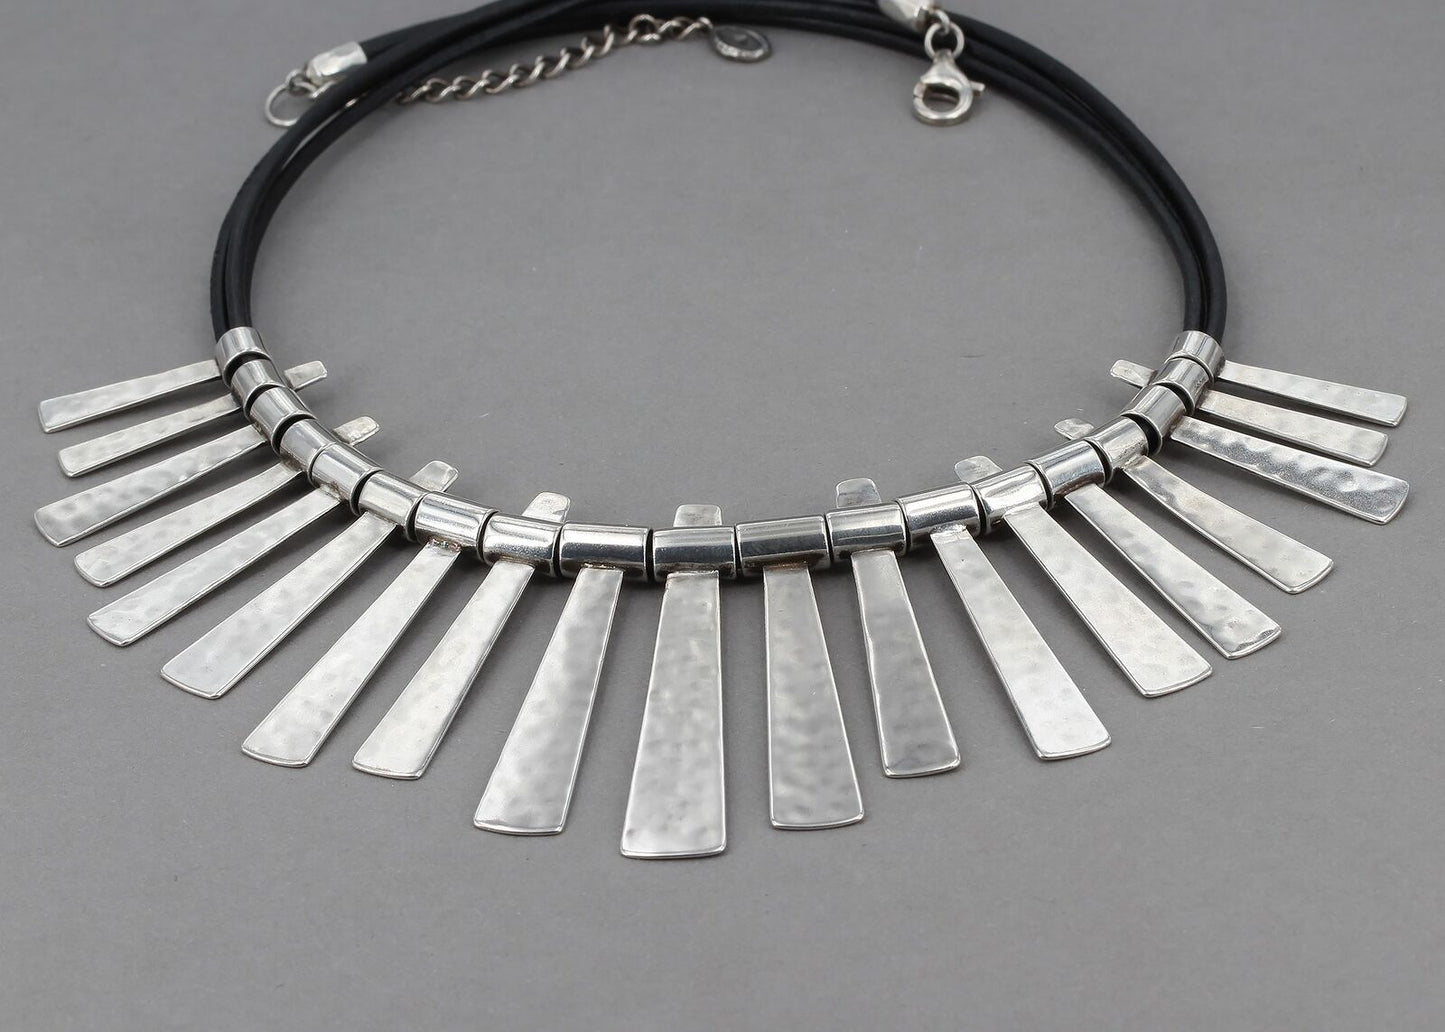 Retired Silpada NOD TO MOD Hammered Sterling Paddle Bib Leather Necklace N3228